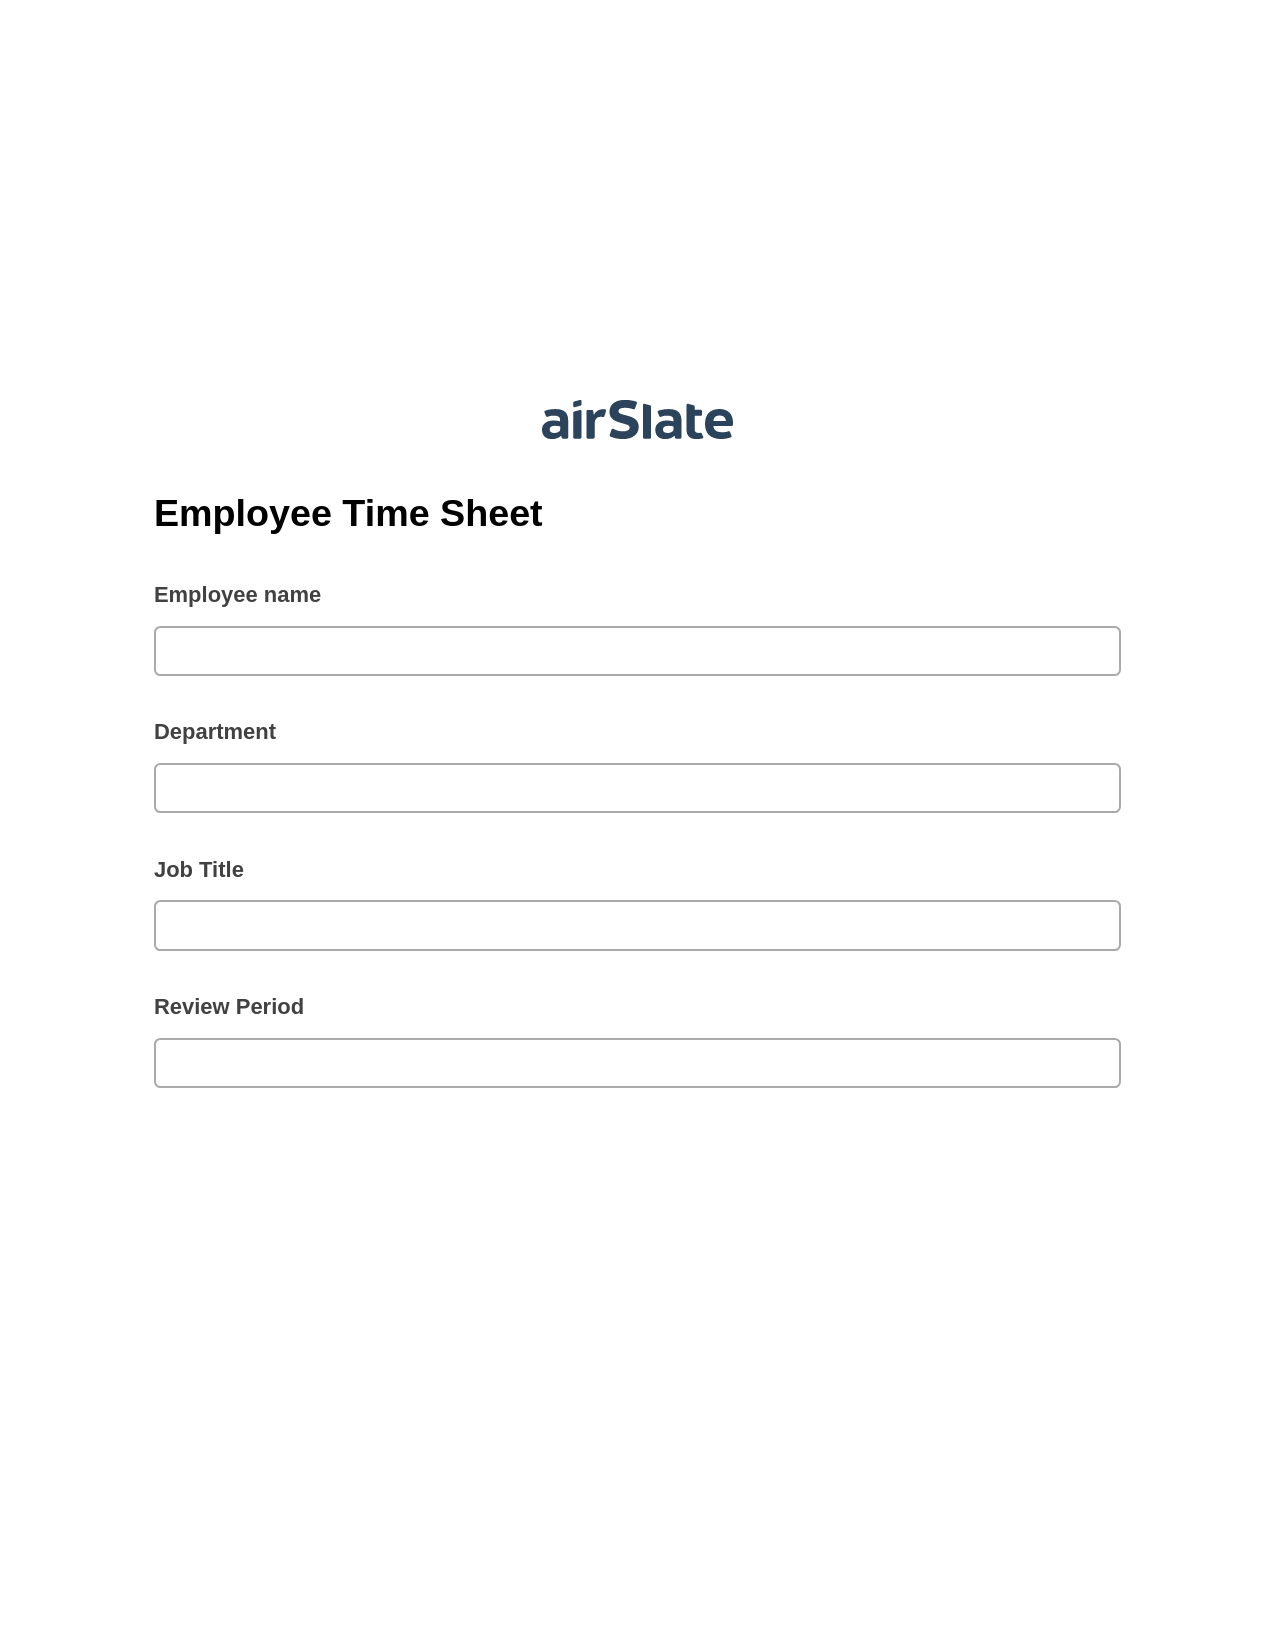 Multirole Employee Time Sheet Pre-fill from AirTable Bot, Send Mailchimp Campaign Bot, Archive to Google Drive Bot